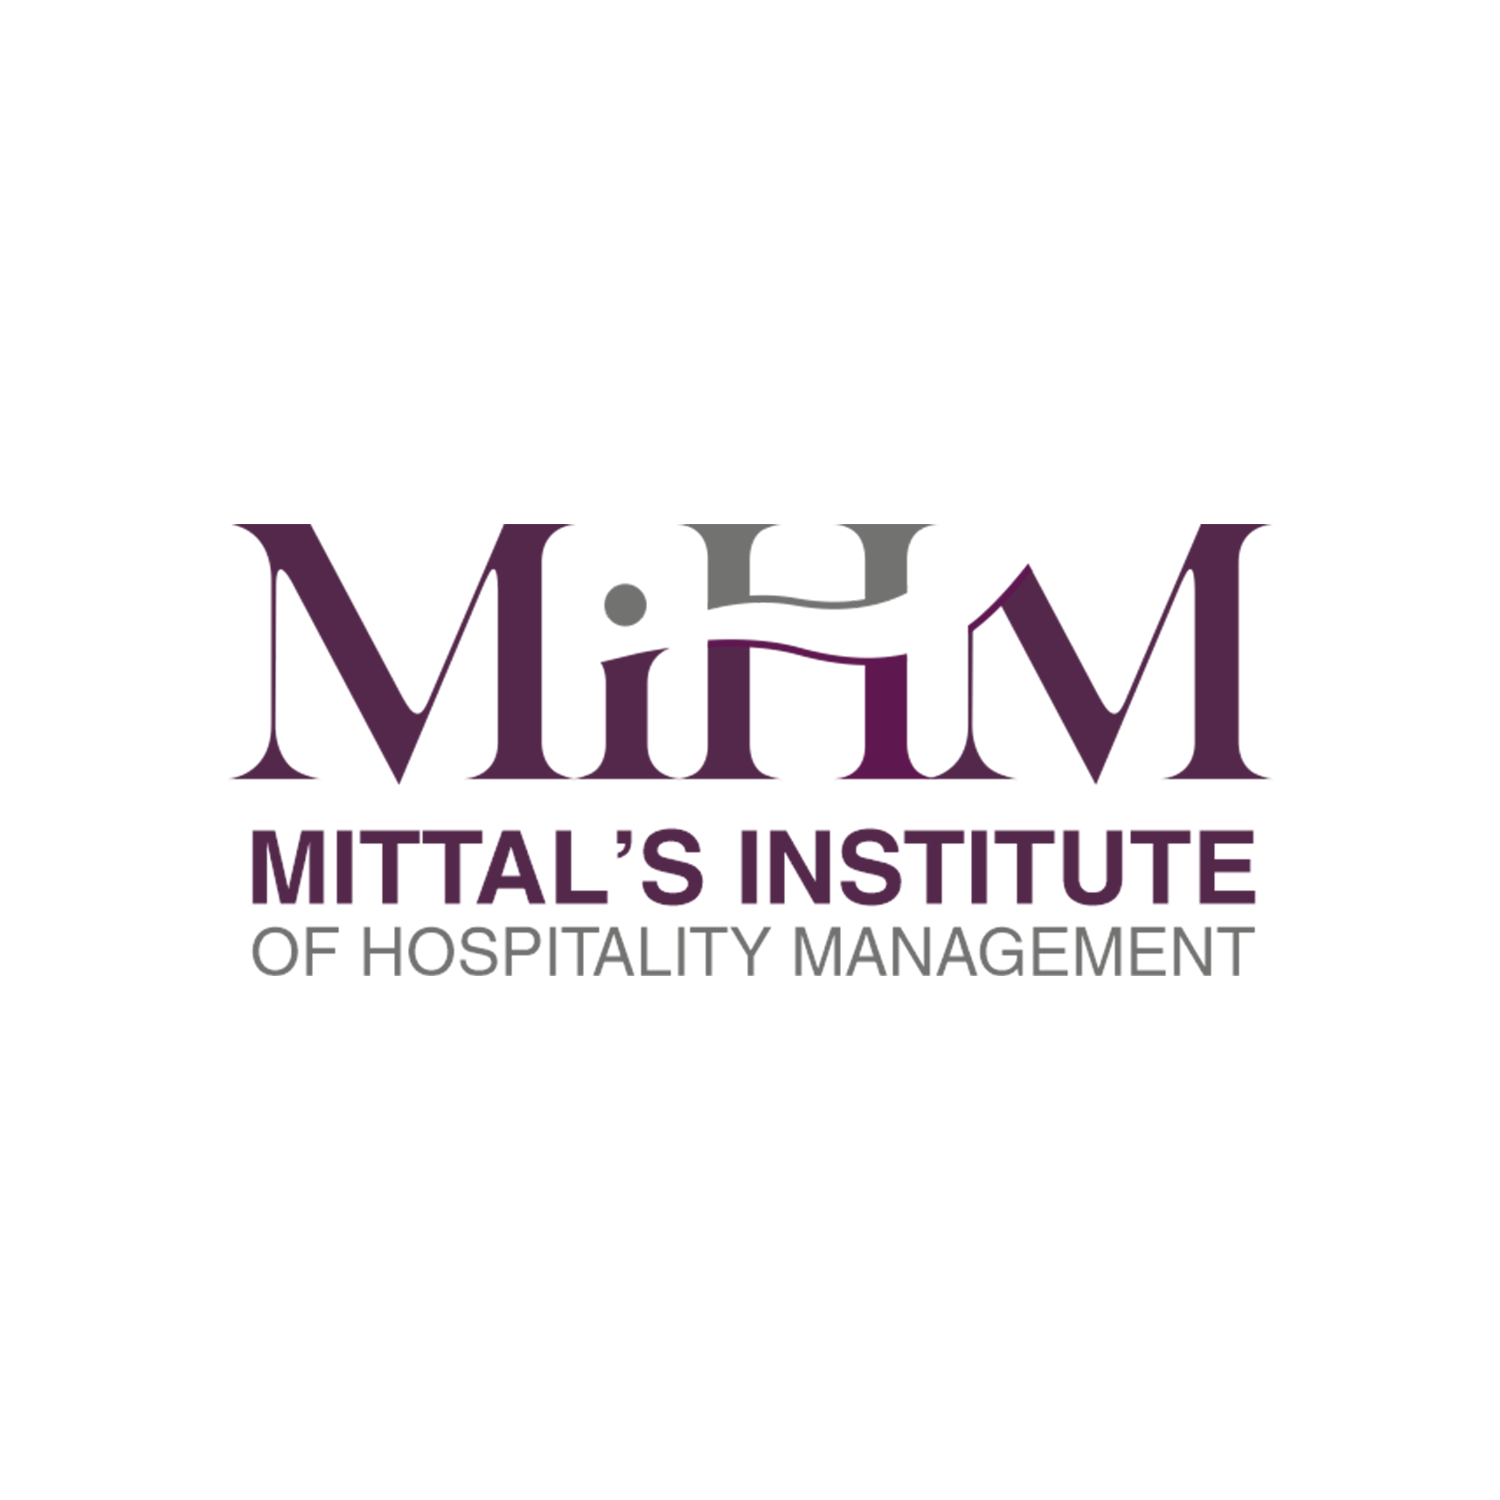 Mittal's Institute of Hospitality Management